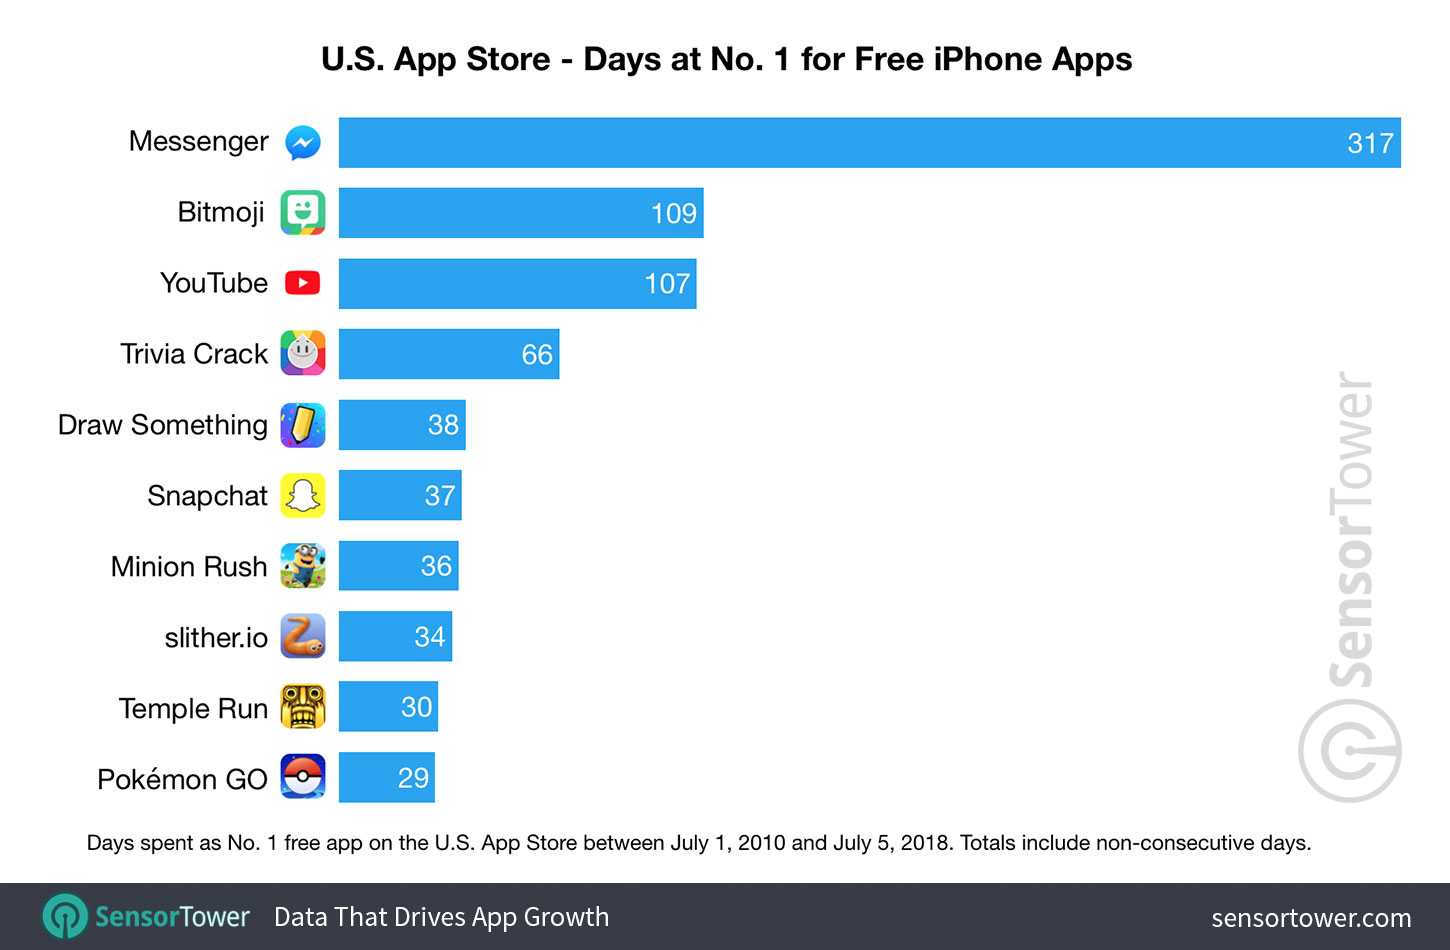 App Charts: All paid ipad apps in games